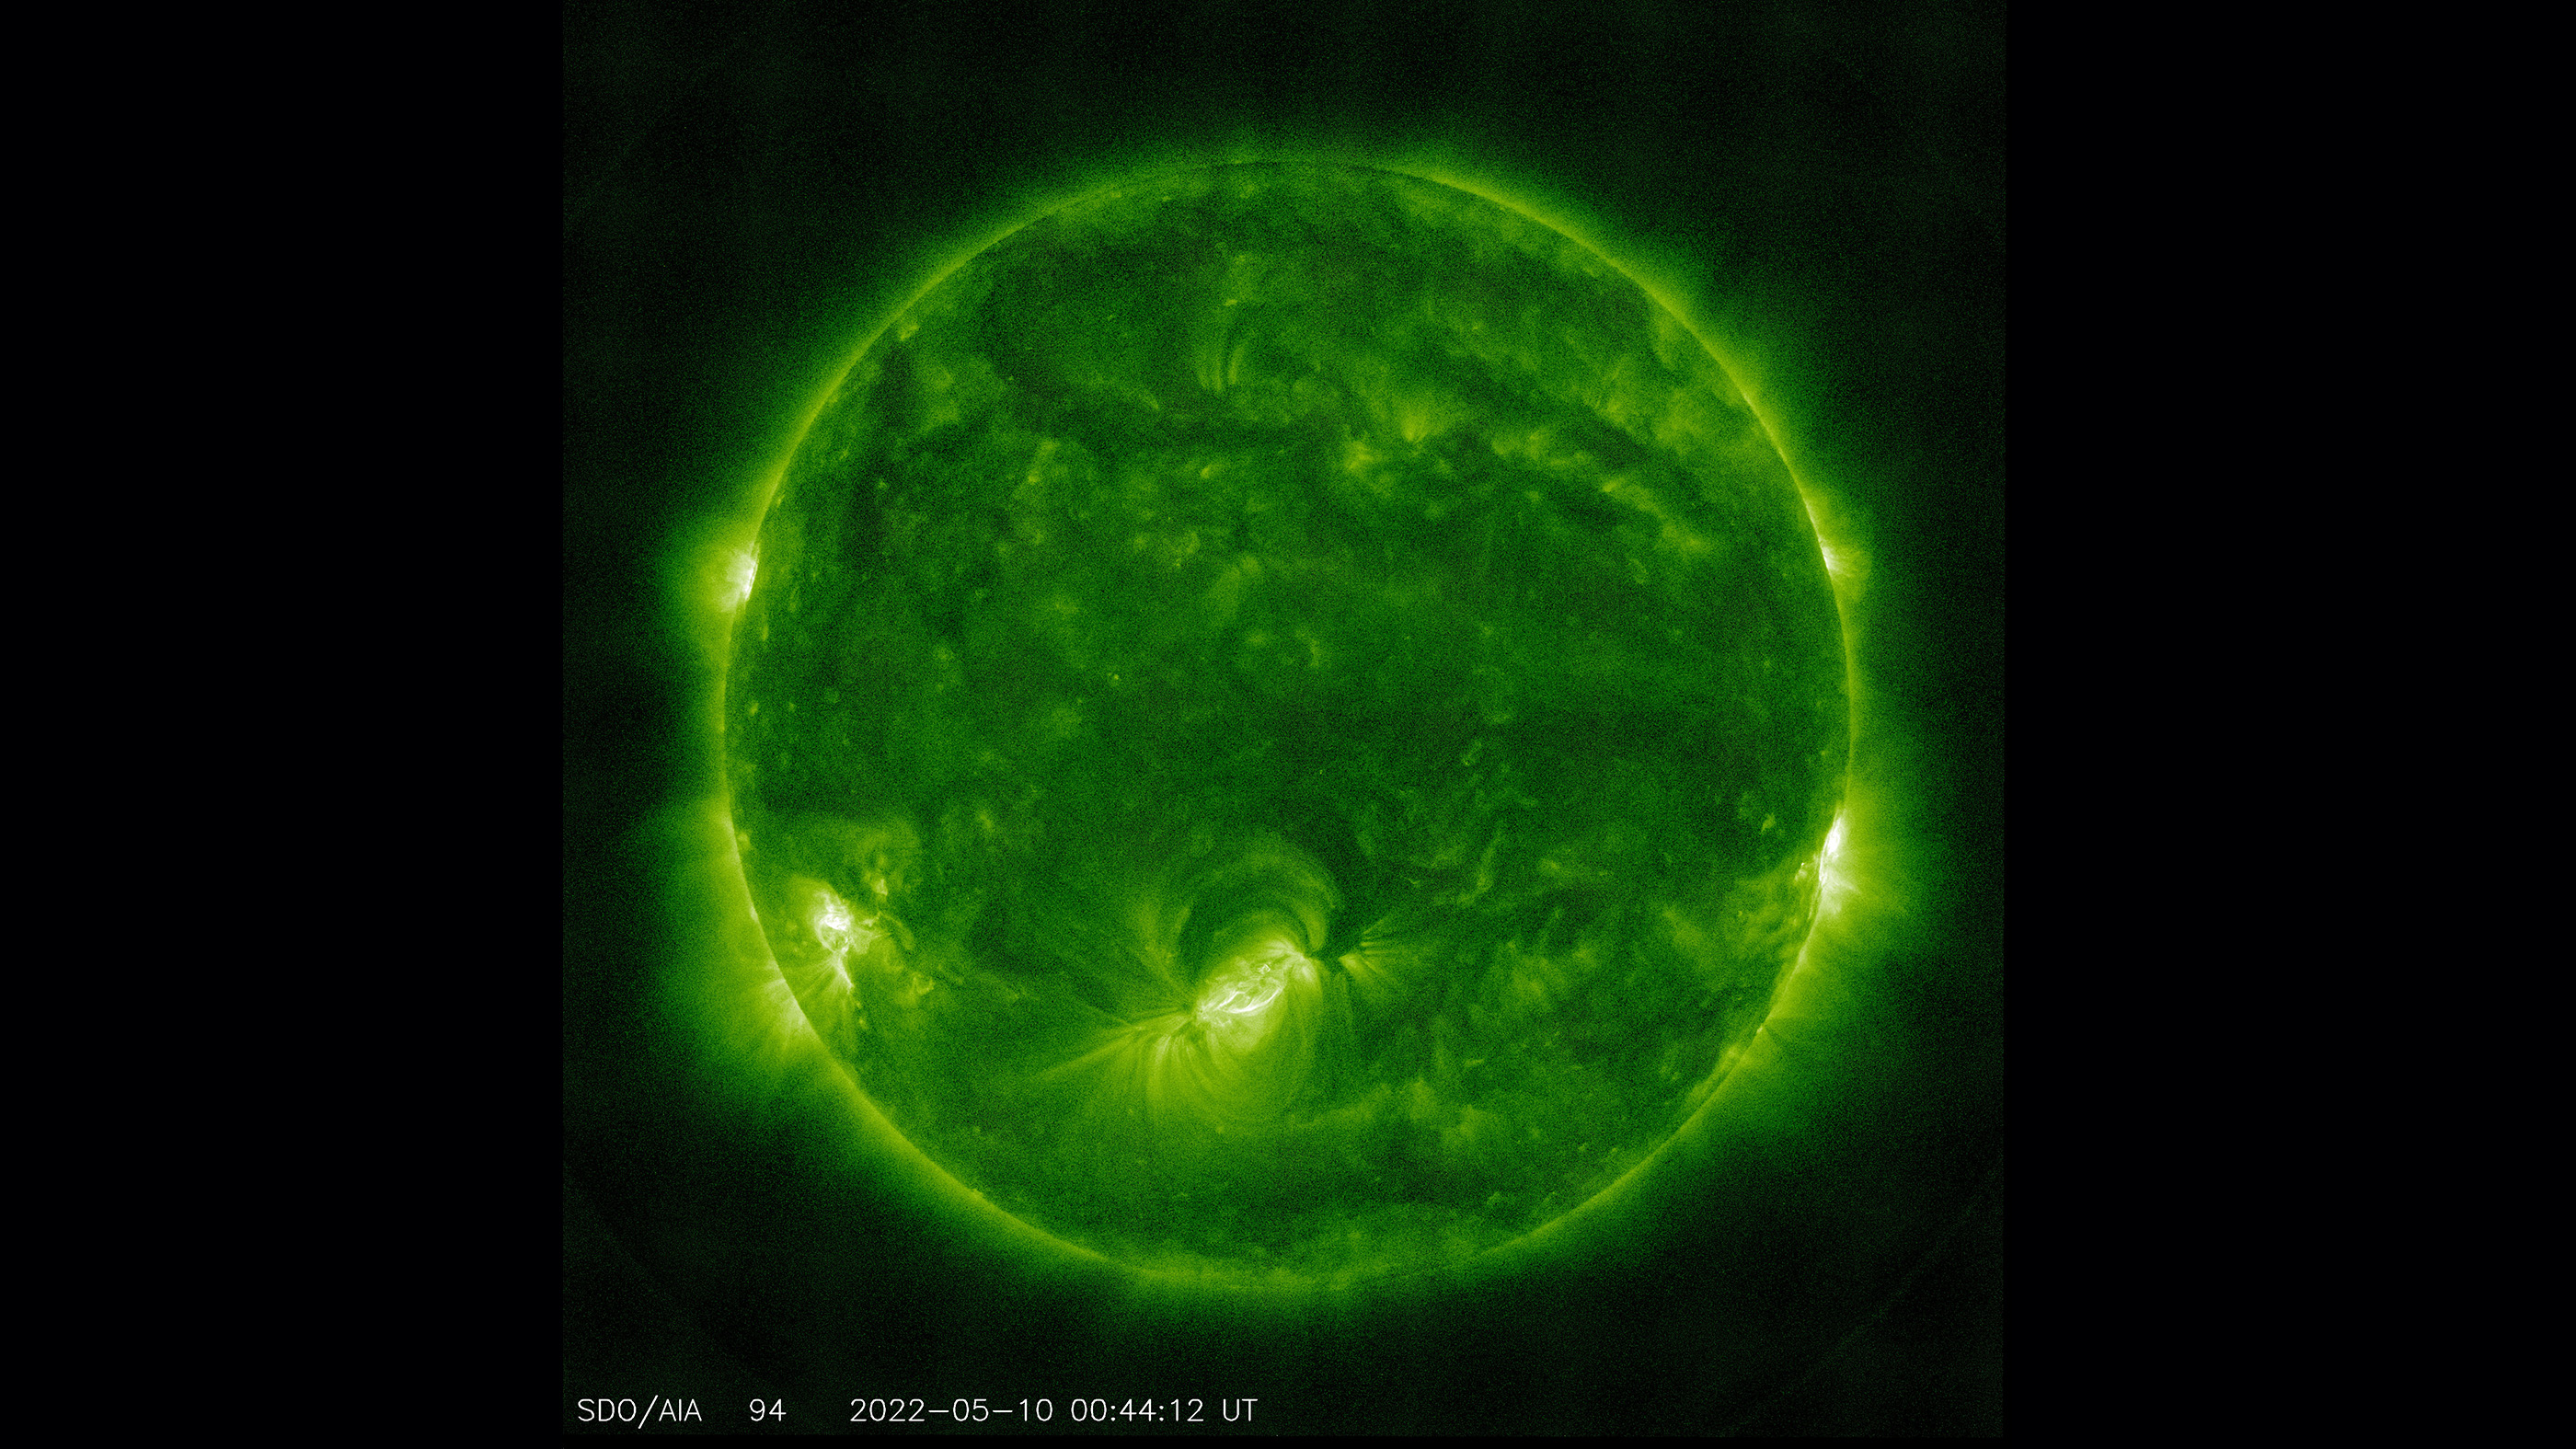 When the Solar Dynamics Observatory took this photo of the Sun at a wavelength of 94 angstroms just before 9 a.m. Tuesday in New York, sunspot region AR3006 (bottom center) was emitting a powerful X1.5 solar flare